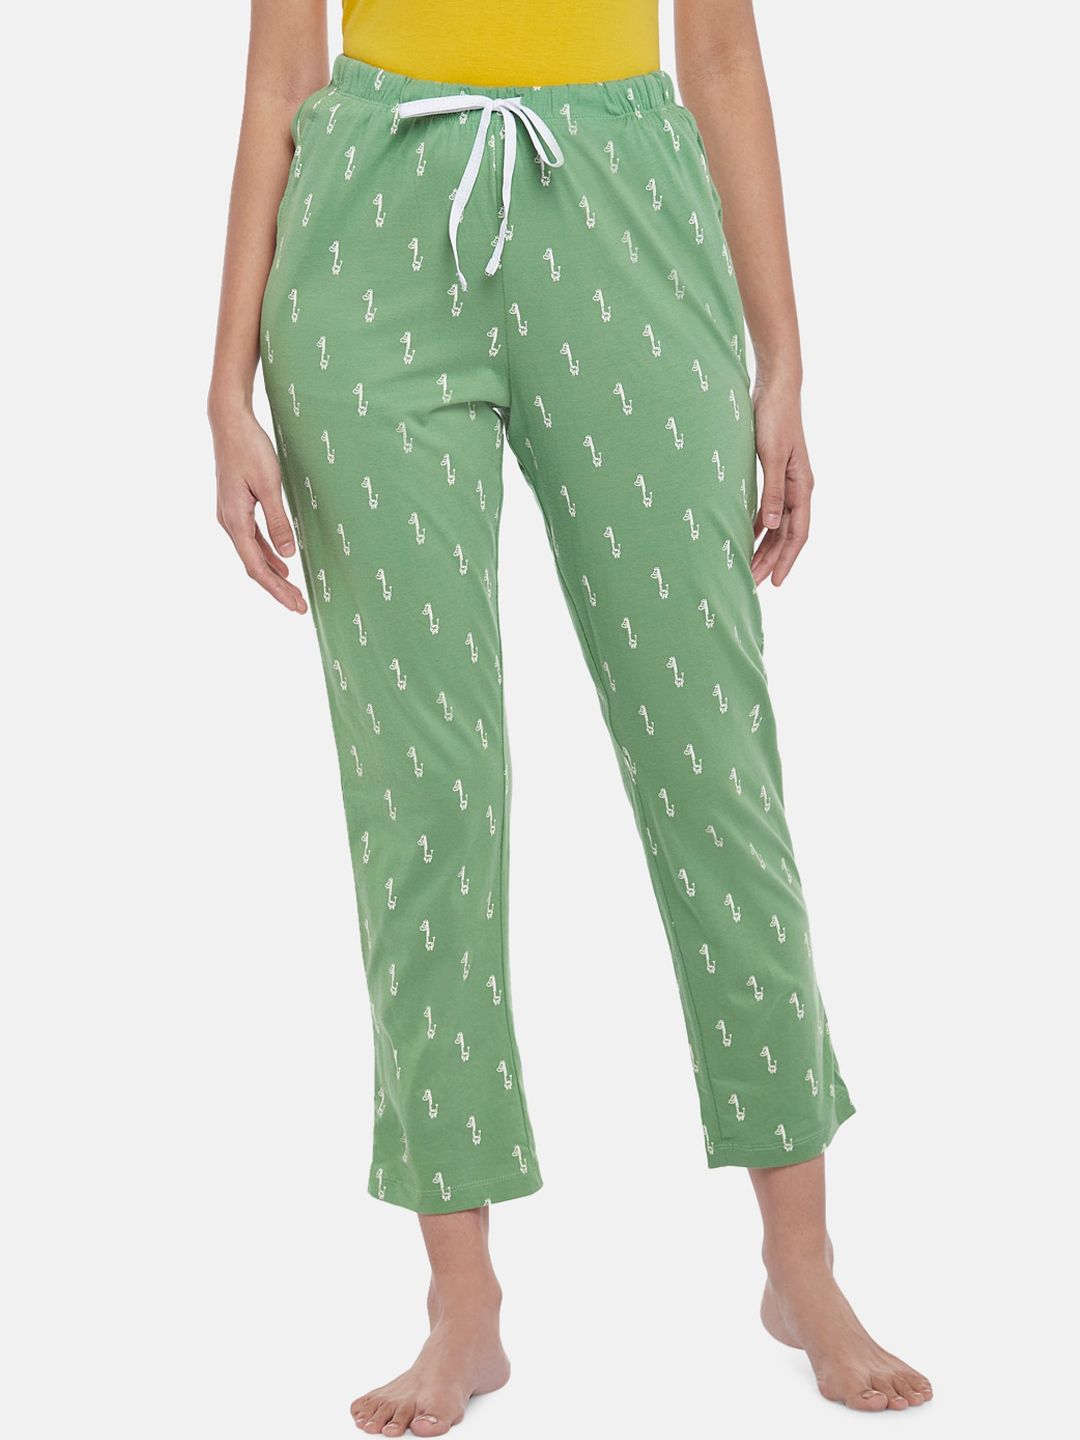 Dreamz by Pantaloons Women Green Printed Cotton Lounge Pants Price in India